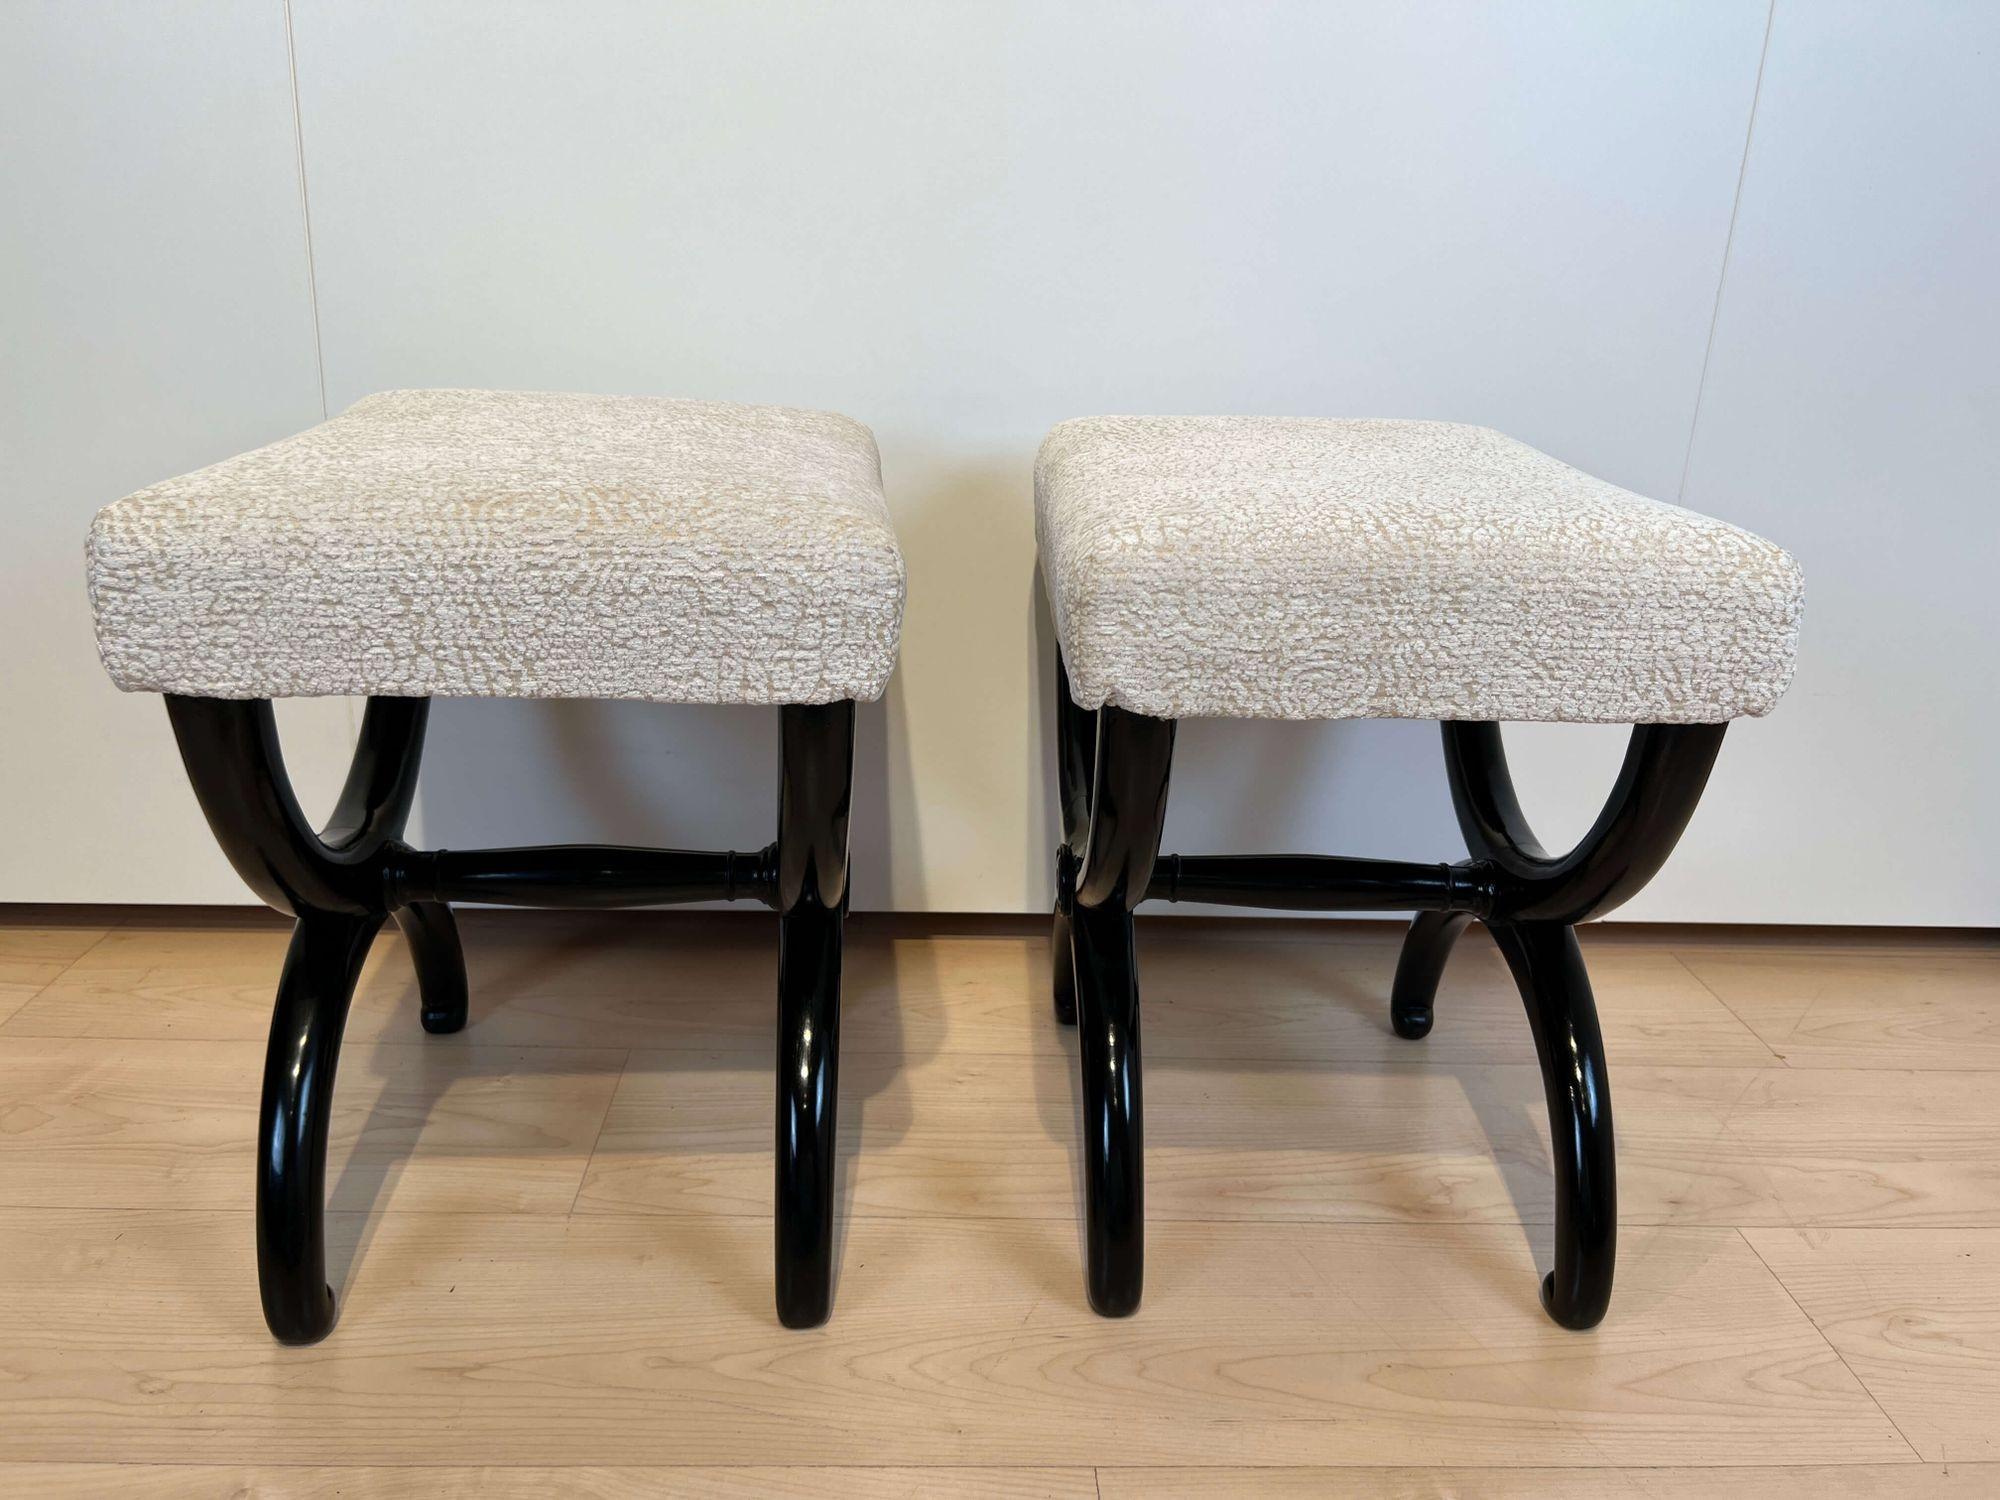 Early 19th Century Pair of Antique Stools, Ebonized Beech Wood, Creme Fabric, France circa 1820 For Sale